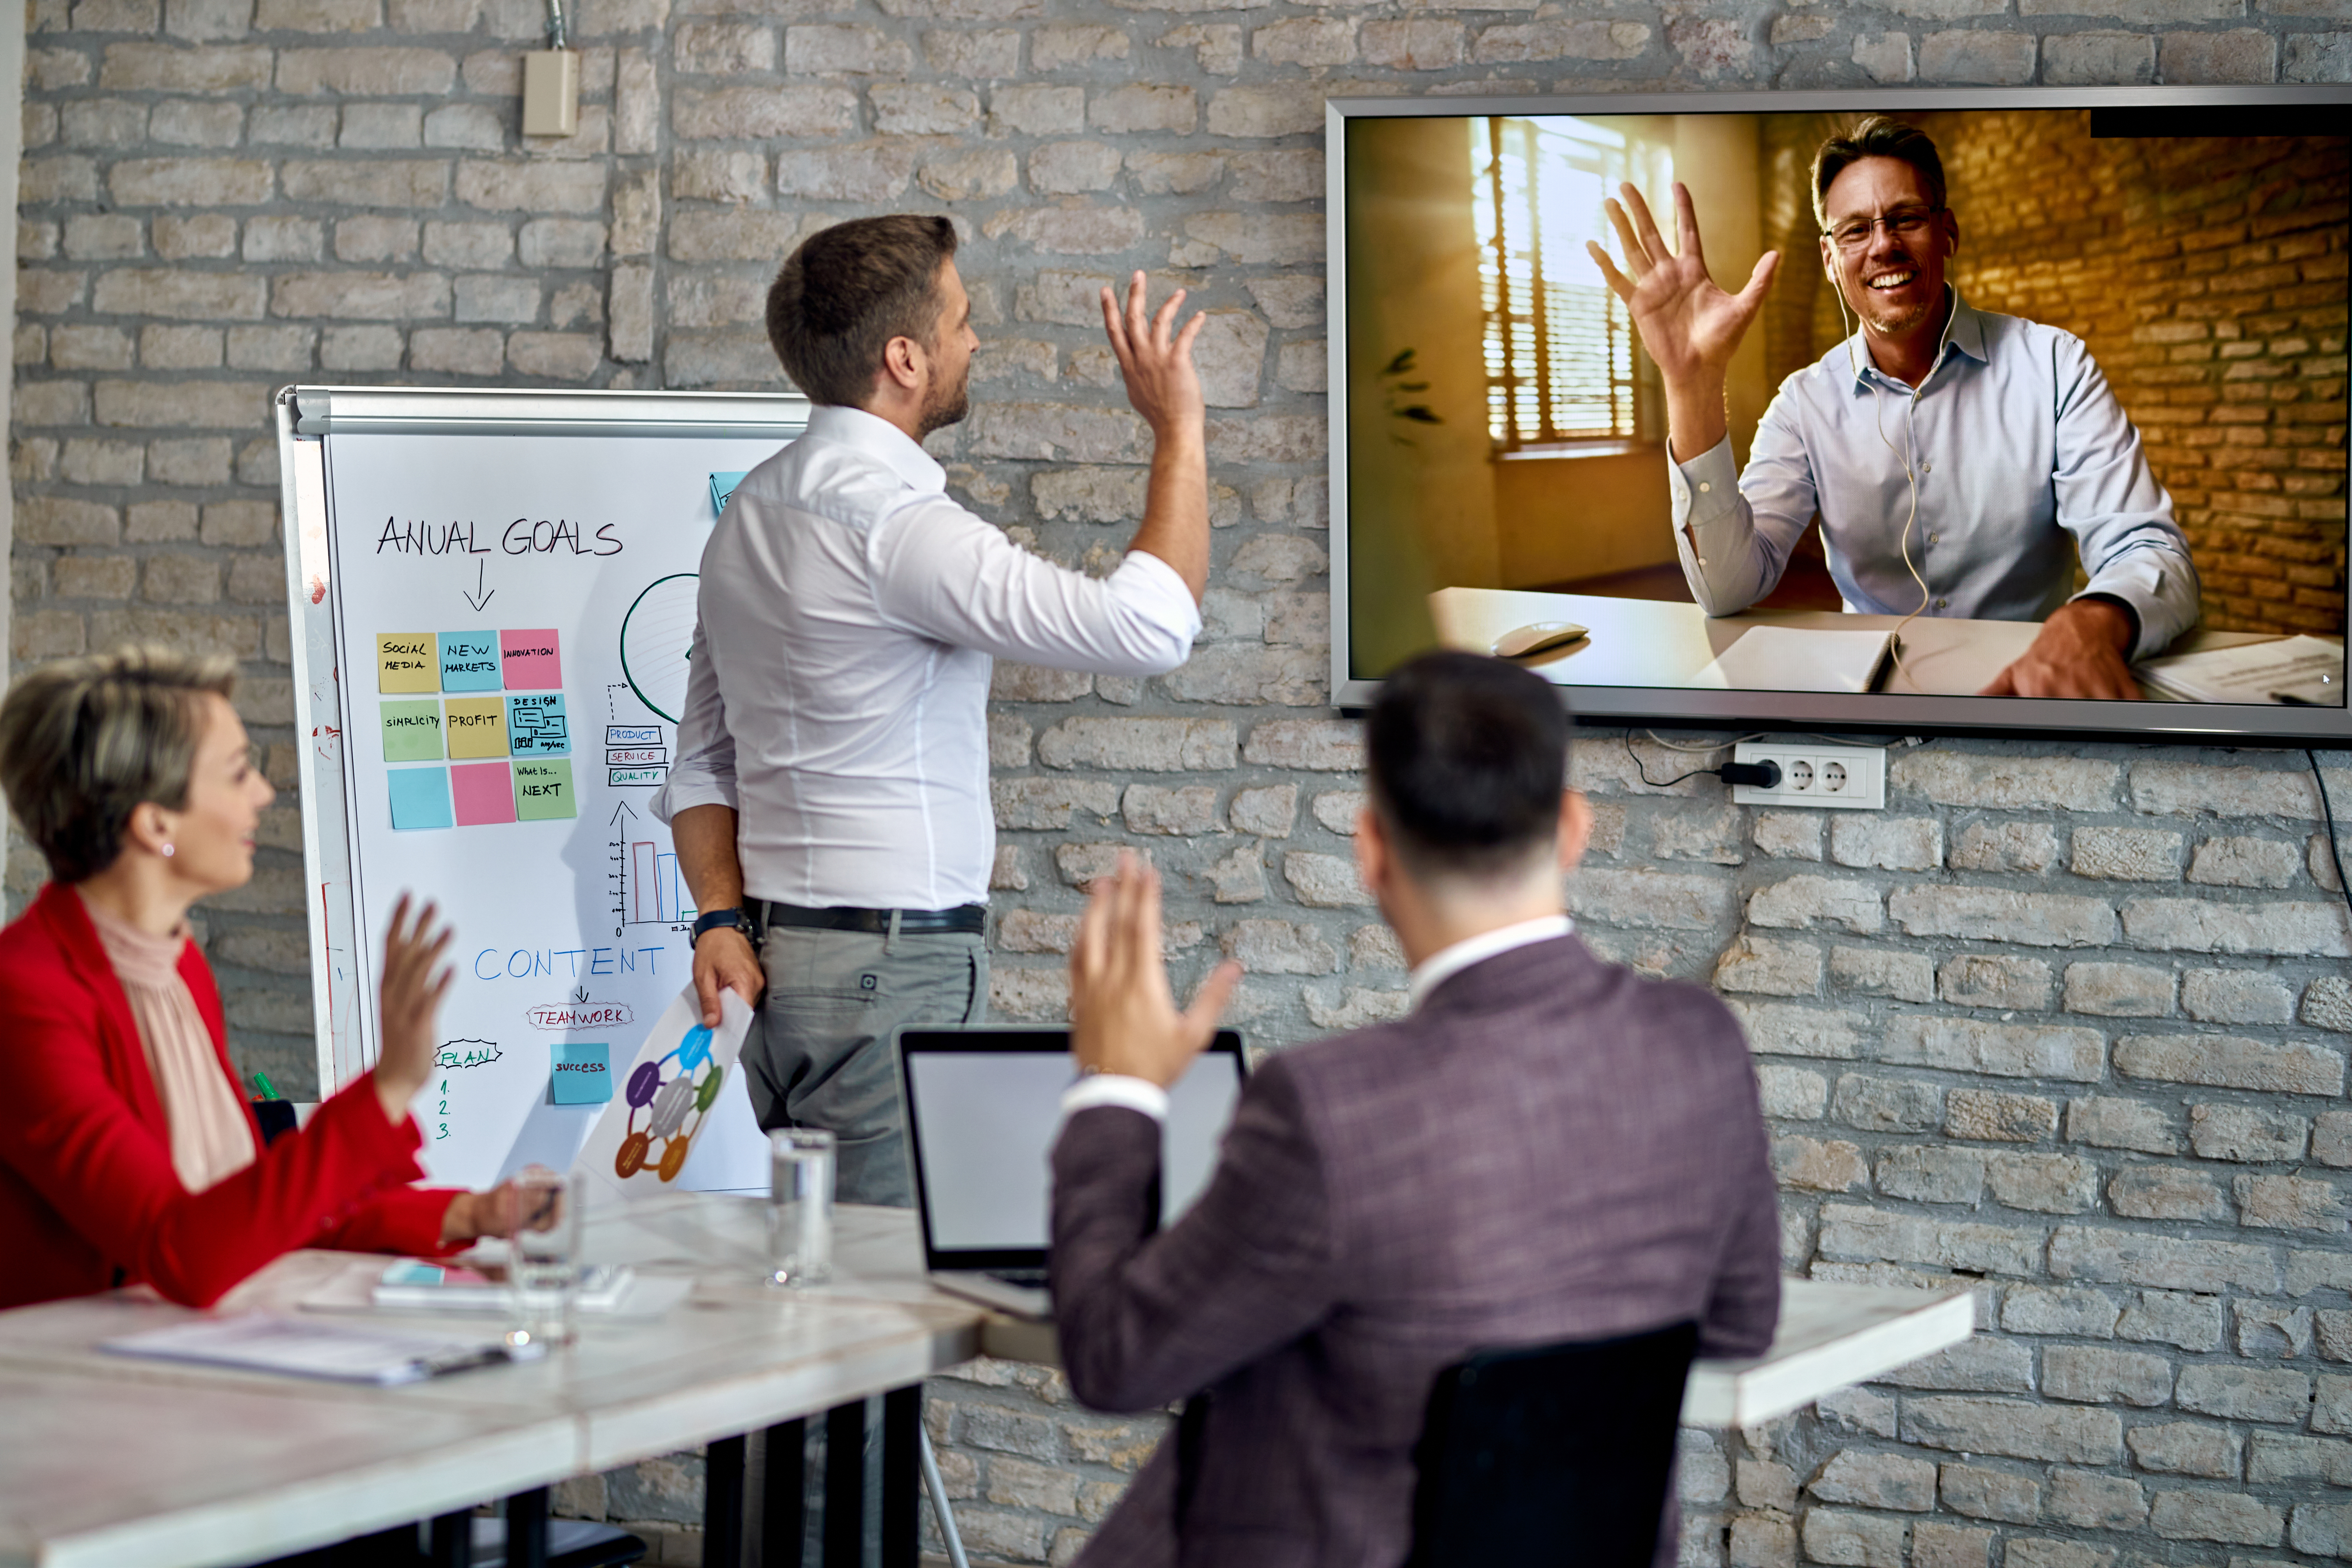 Strategies to make board meetings more interactive and efficient